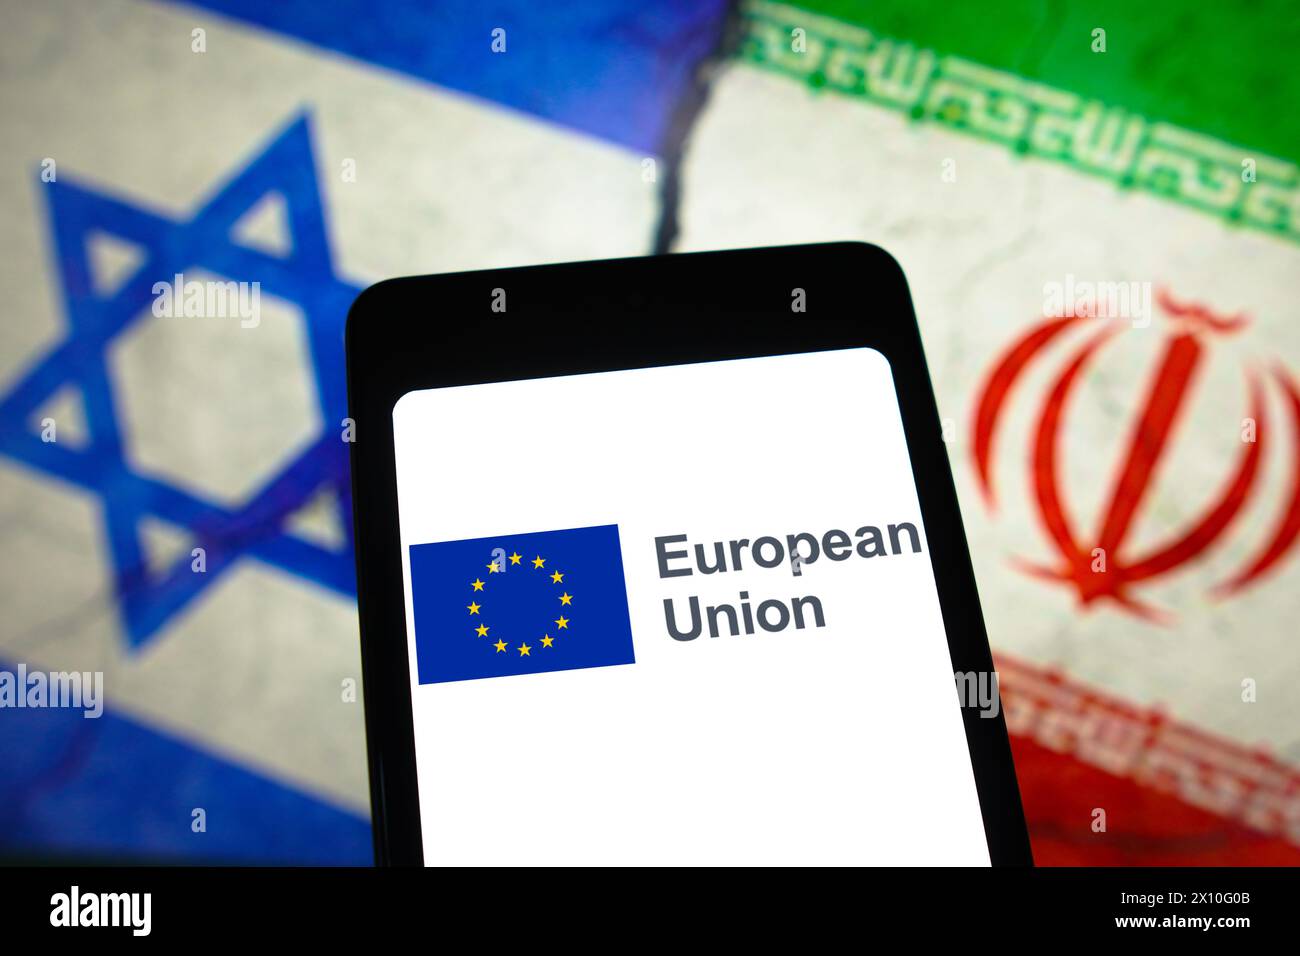 In this photo illustration, the European Union (EU) logo is displayed on a smartphone screen and flags of Israel and Iran in the background. Stock Photo